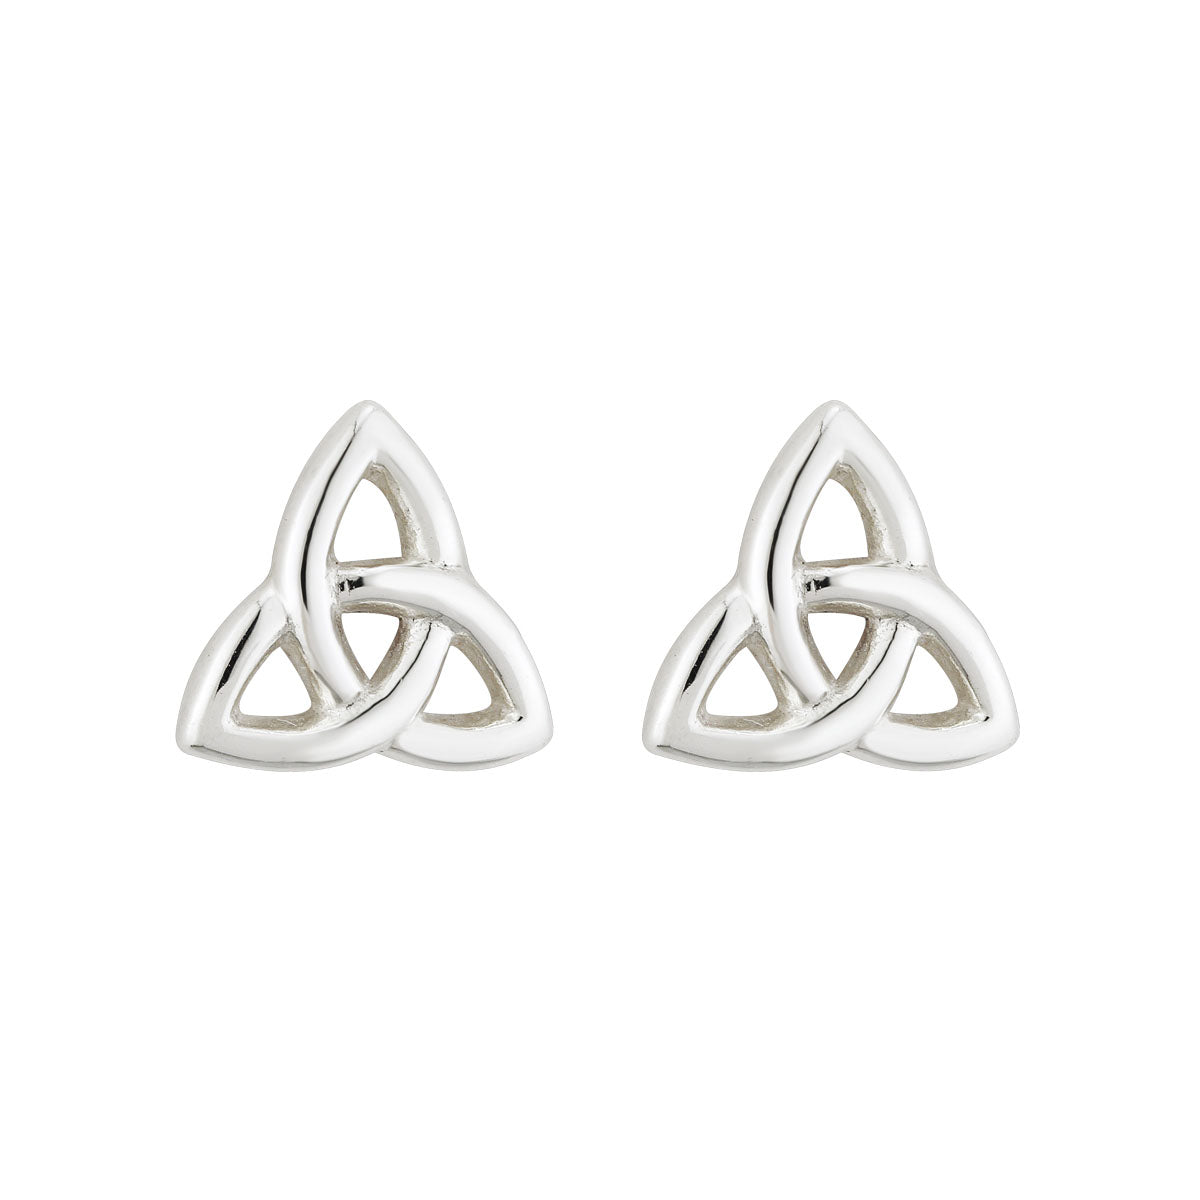 sterling silver small trinity knot stud earrings s3082 from Solvar